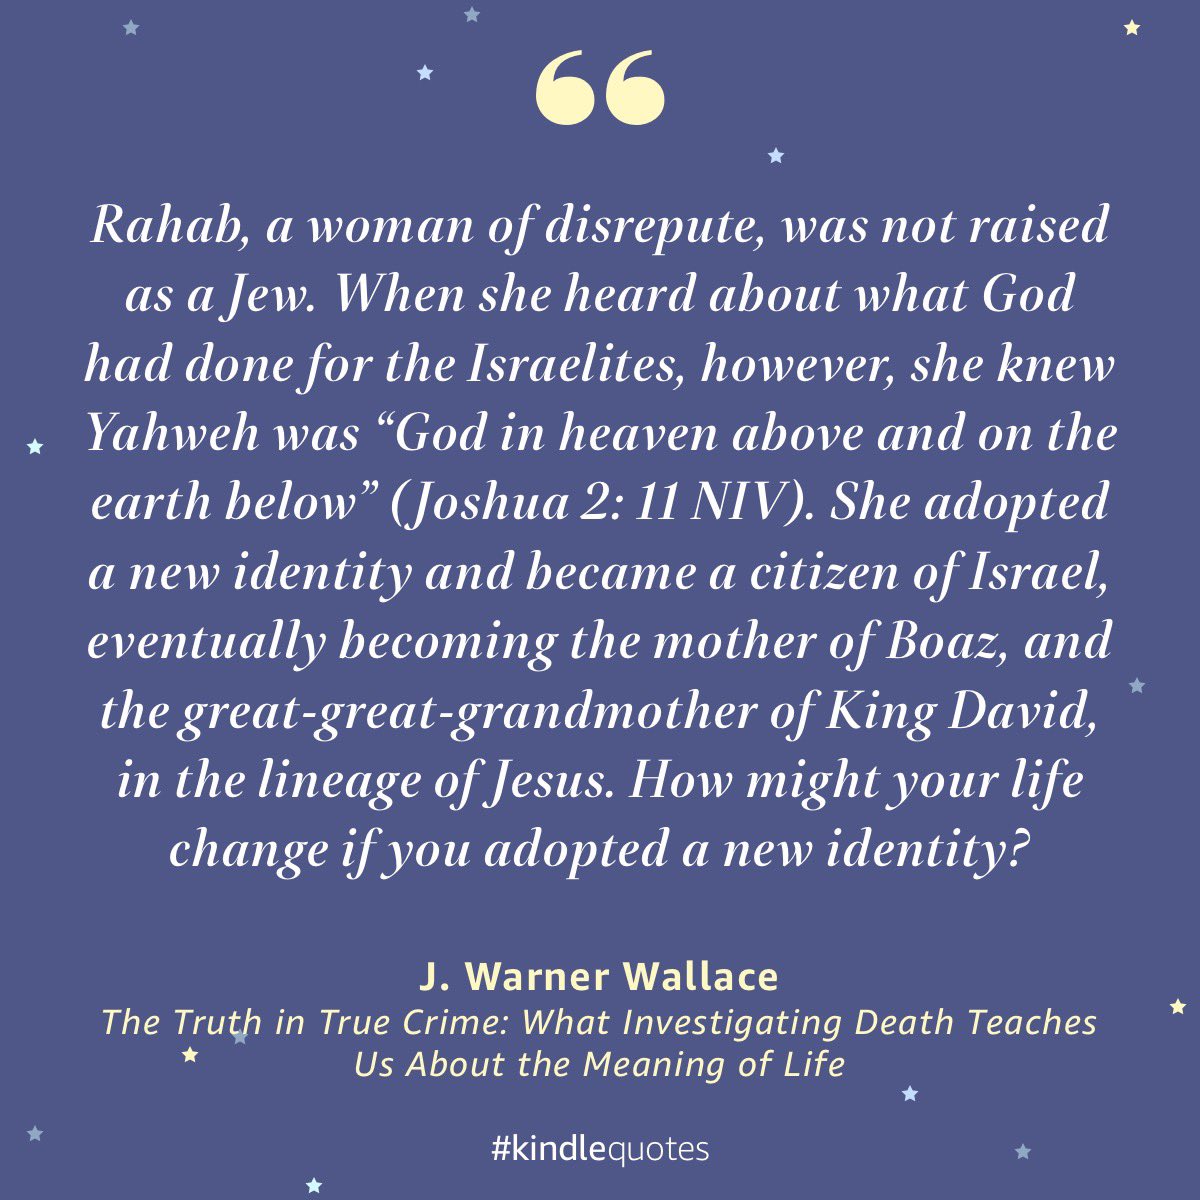 How would your life change if you adopted a new identity? Find your copy of this excellent book!

#identityinchrist #christiansoftwitter #Identity #rahab